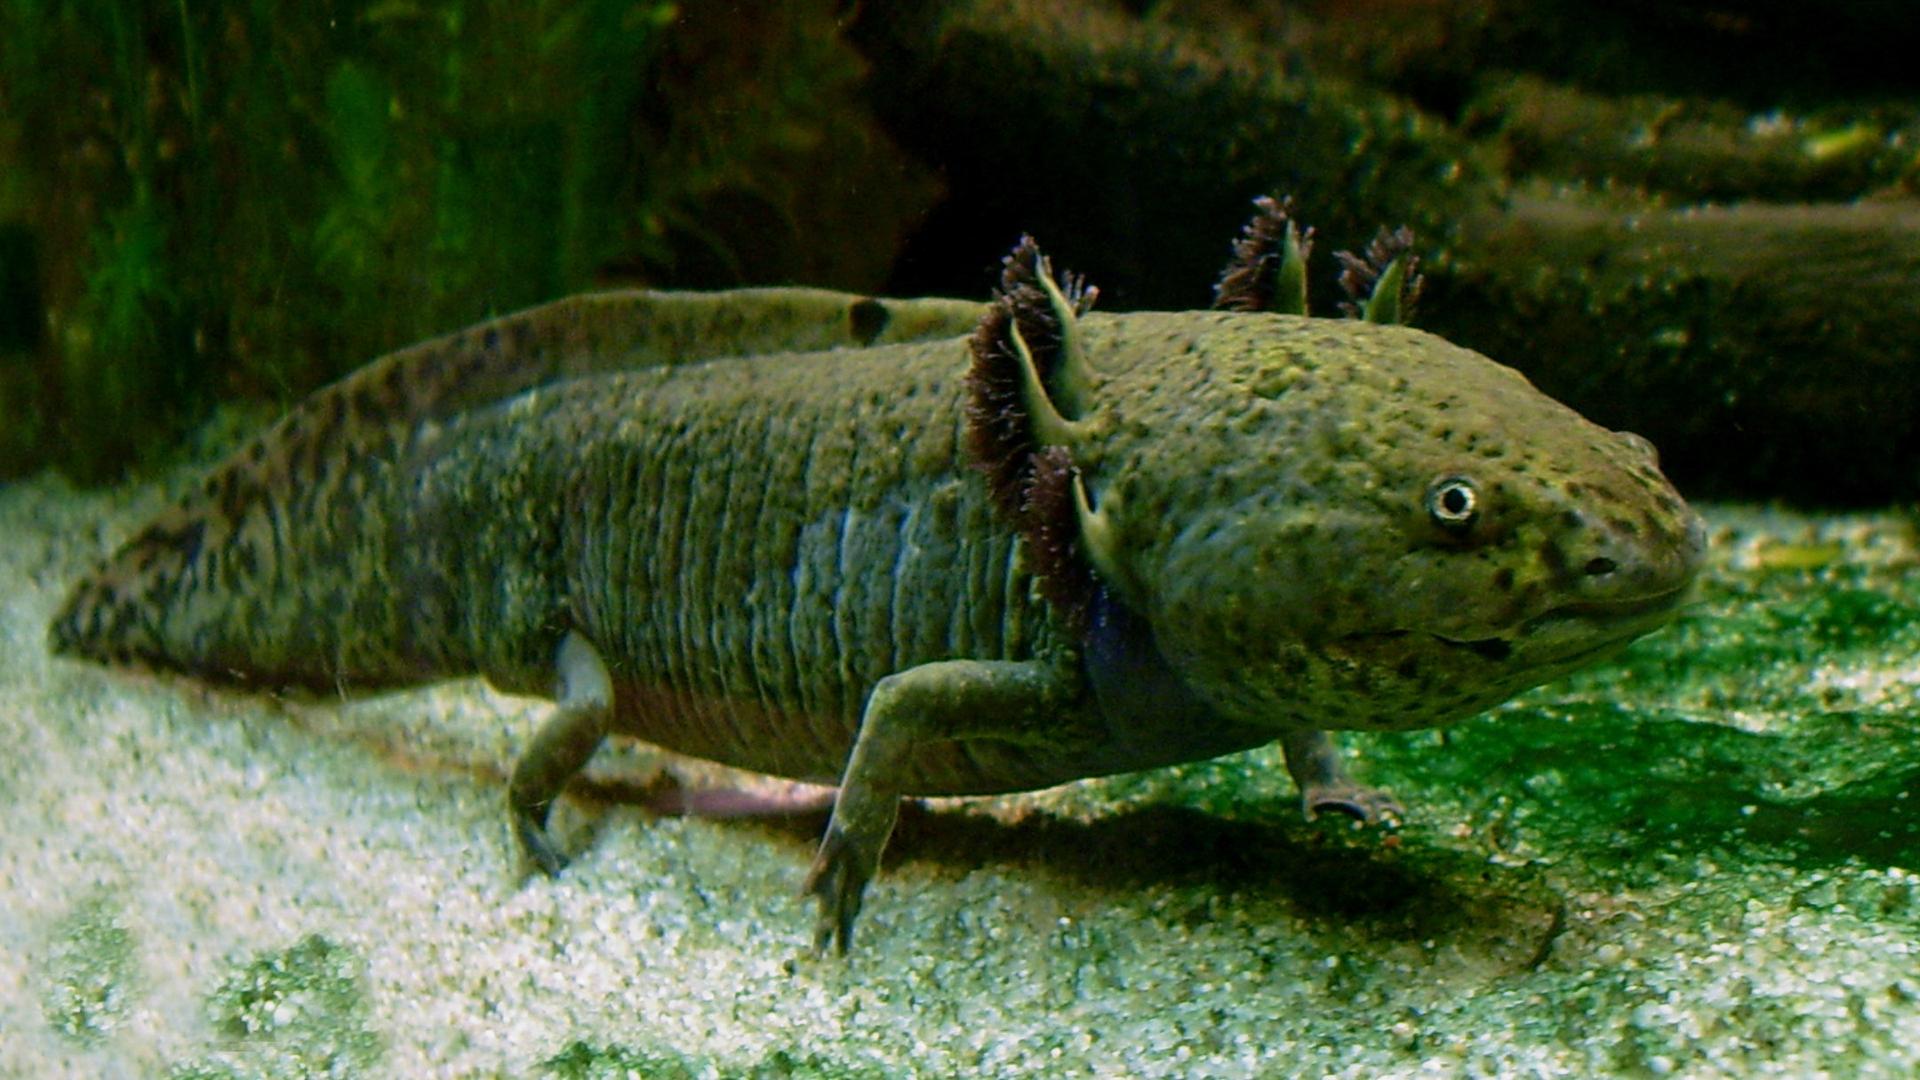 The only natural habitat of the axolotl--also known as the "water monster" and the "Mexican walking fish"-- is the Xochimilco network of lakes and canals, built by the Aztecs but now suffering from pollution and urban sprawl.